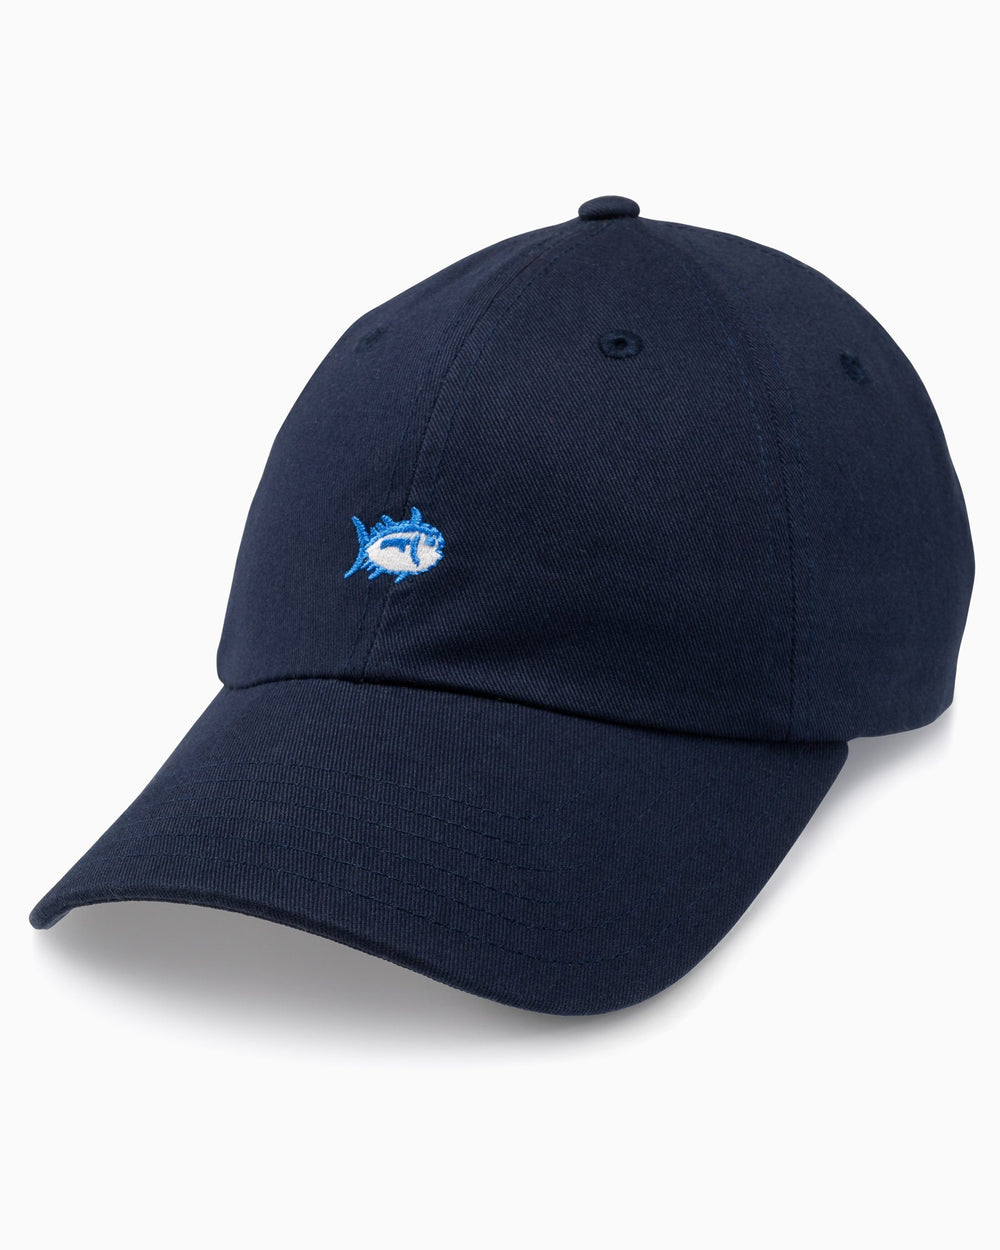 The front of the Skipjack Hat by Southern Tide - Navy